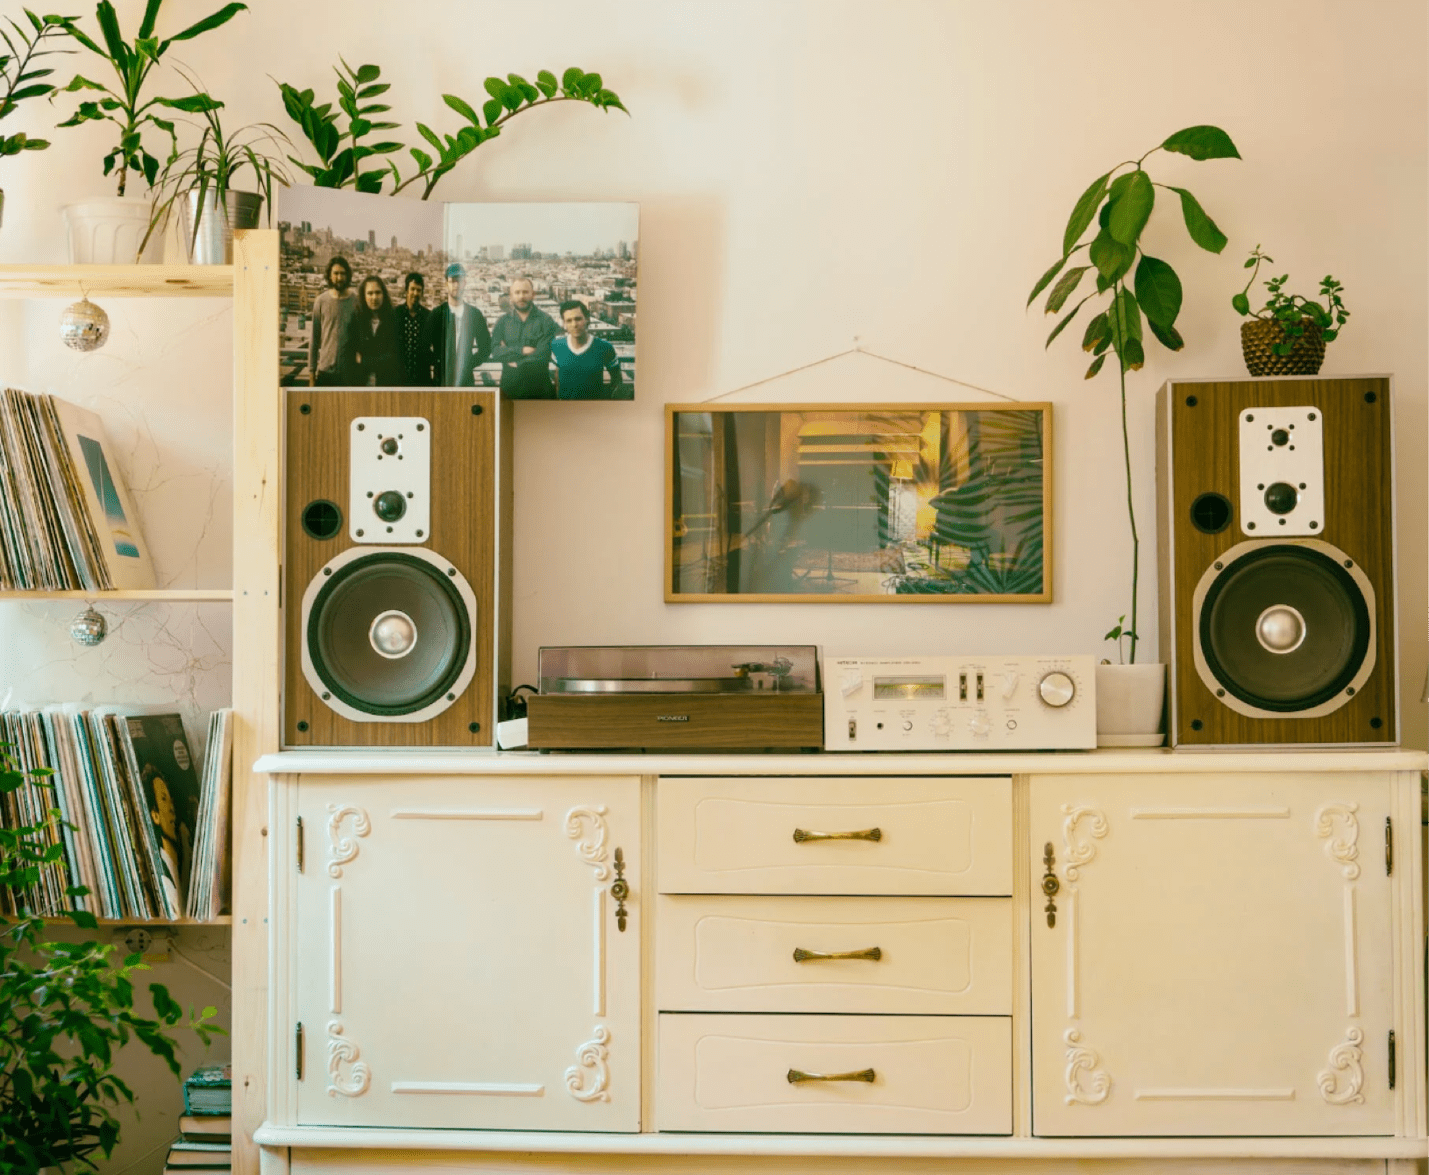 cream furniture with green plants surrounding it record player and wood-paneled stereo system